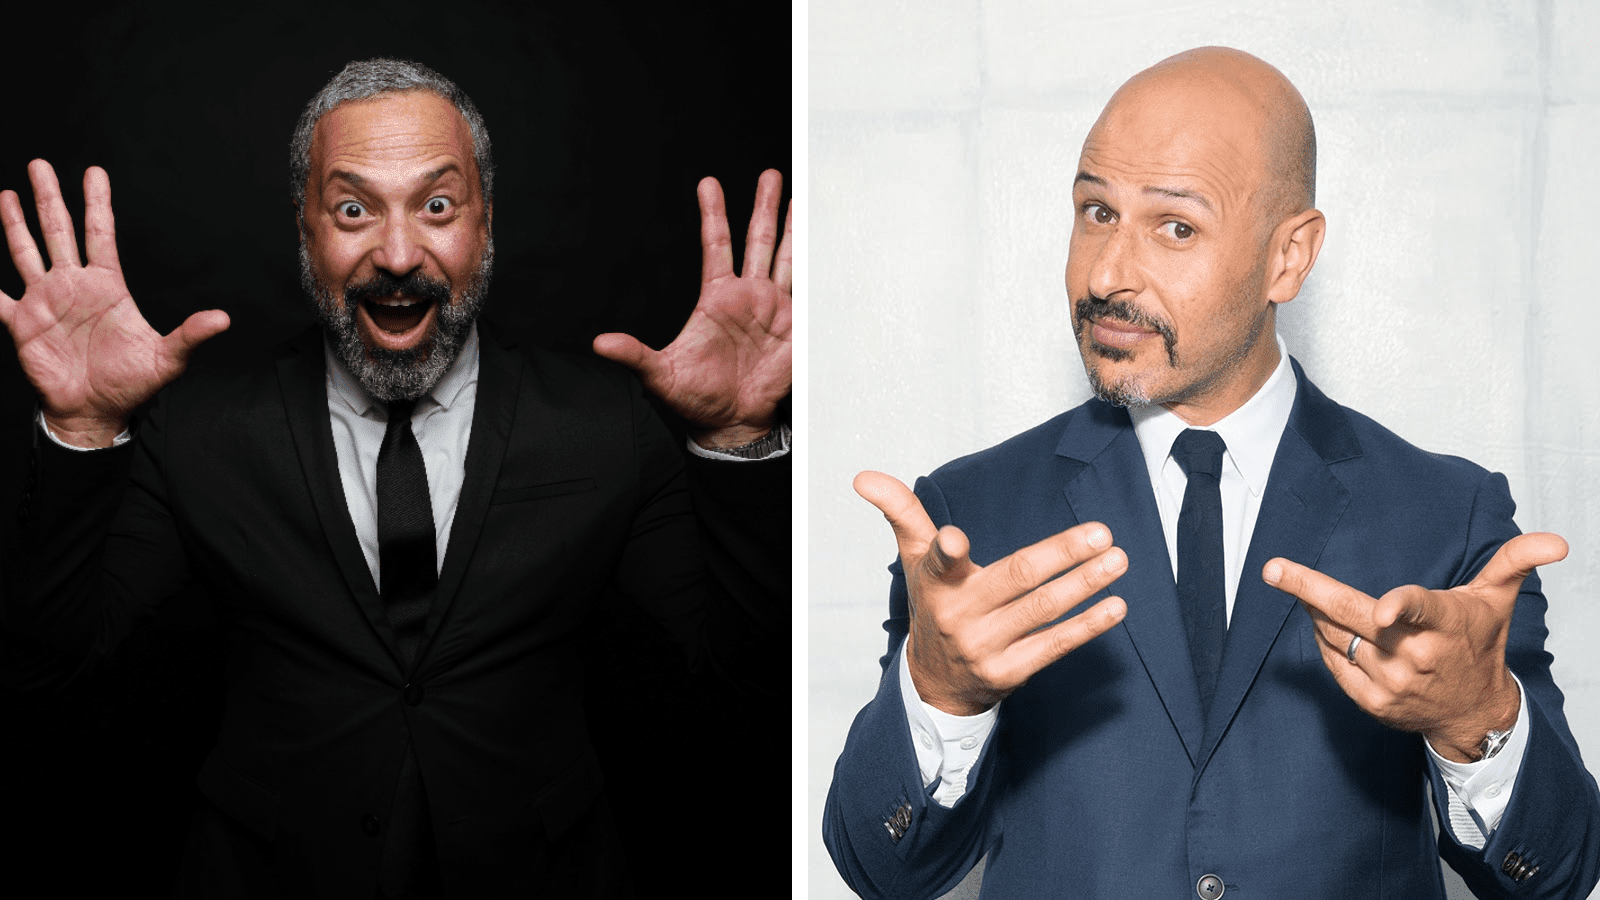 Ahmed Ahmed and Maz Jobrani to Return to Egypt for Live Stand-up Shows